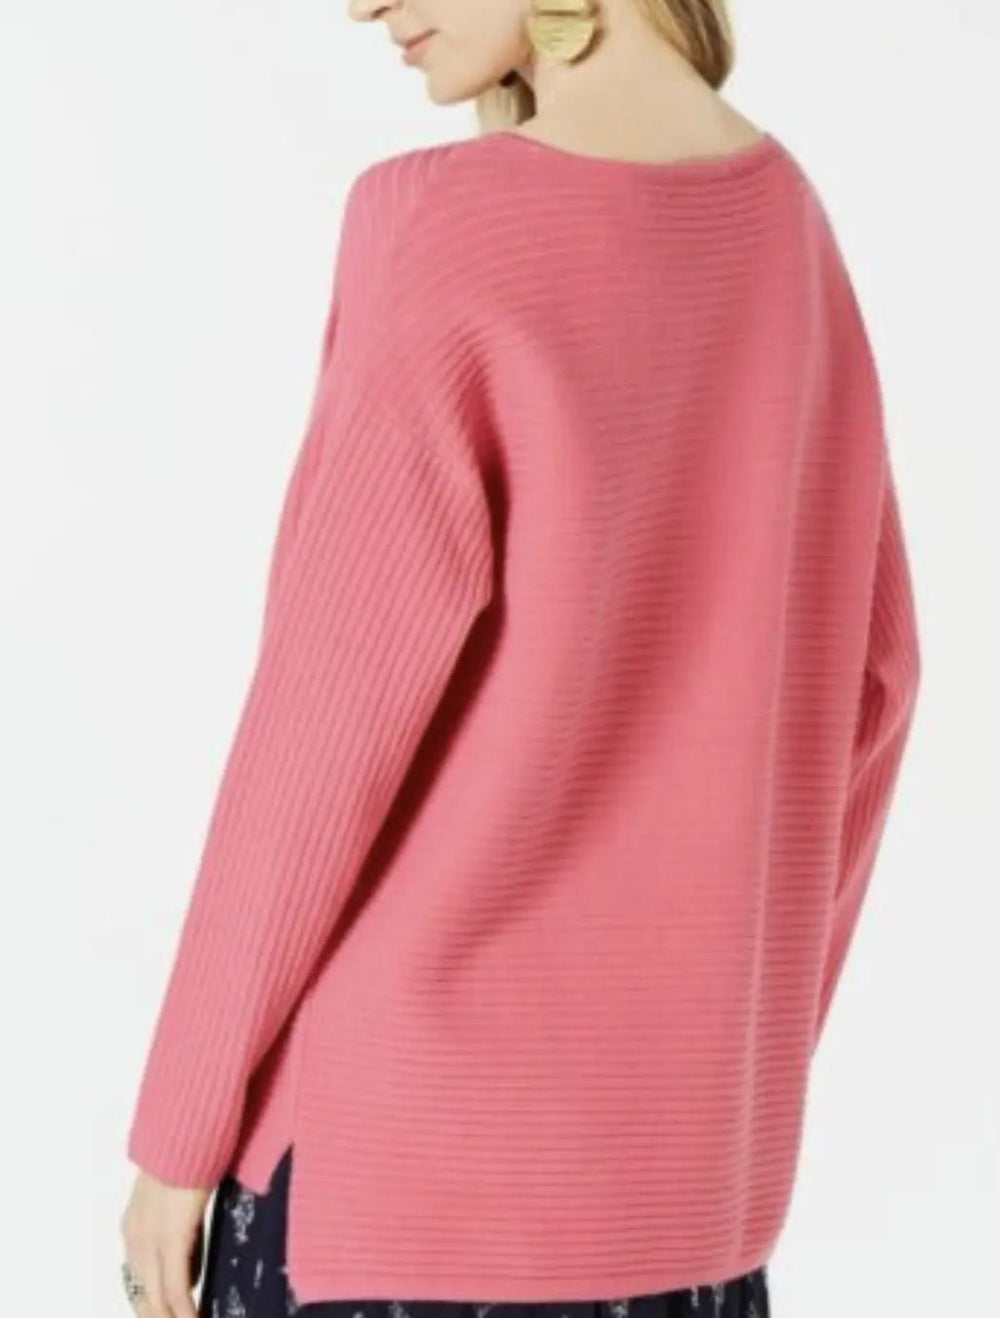 Style & Co Sweater Boatneck Rib Pullover Pink Large - BELLEZA'S - Style & Co Sweater Boatneck Rib Pullover Pink Large - BELLEZA'S - Sweater -